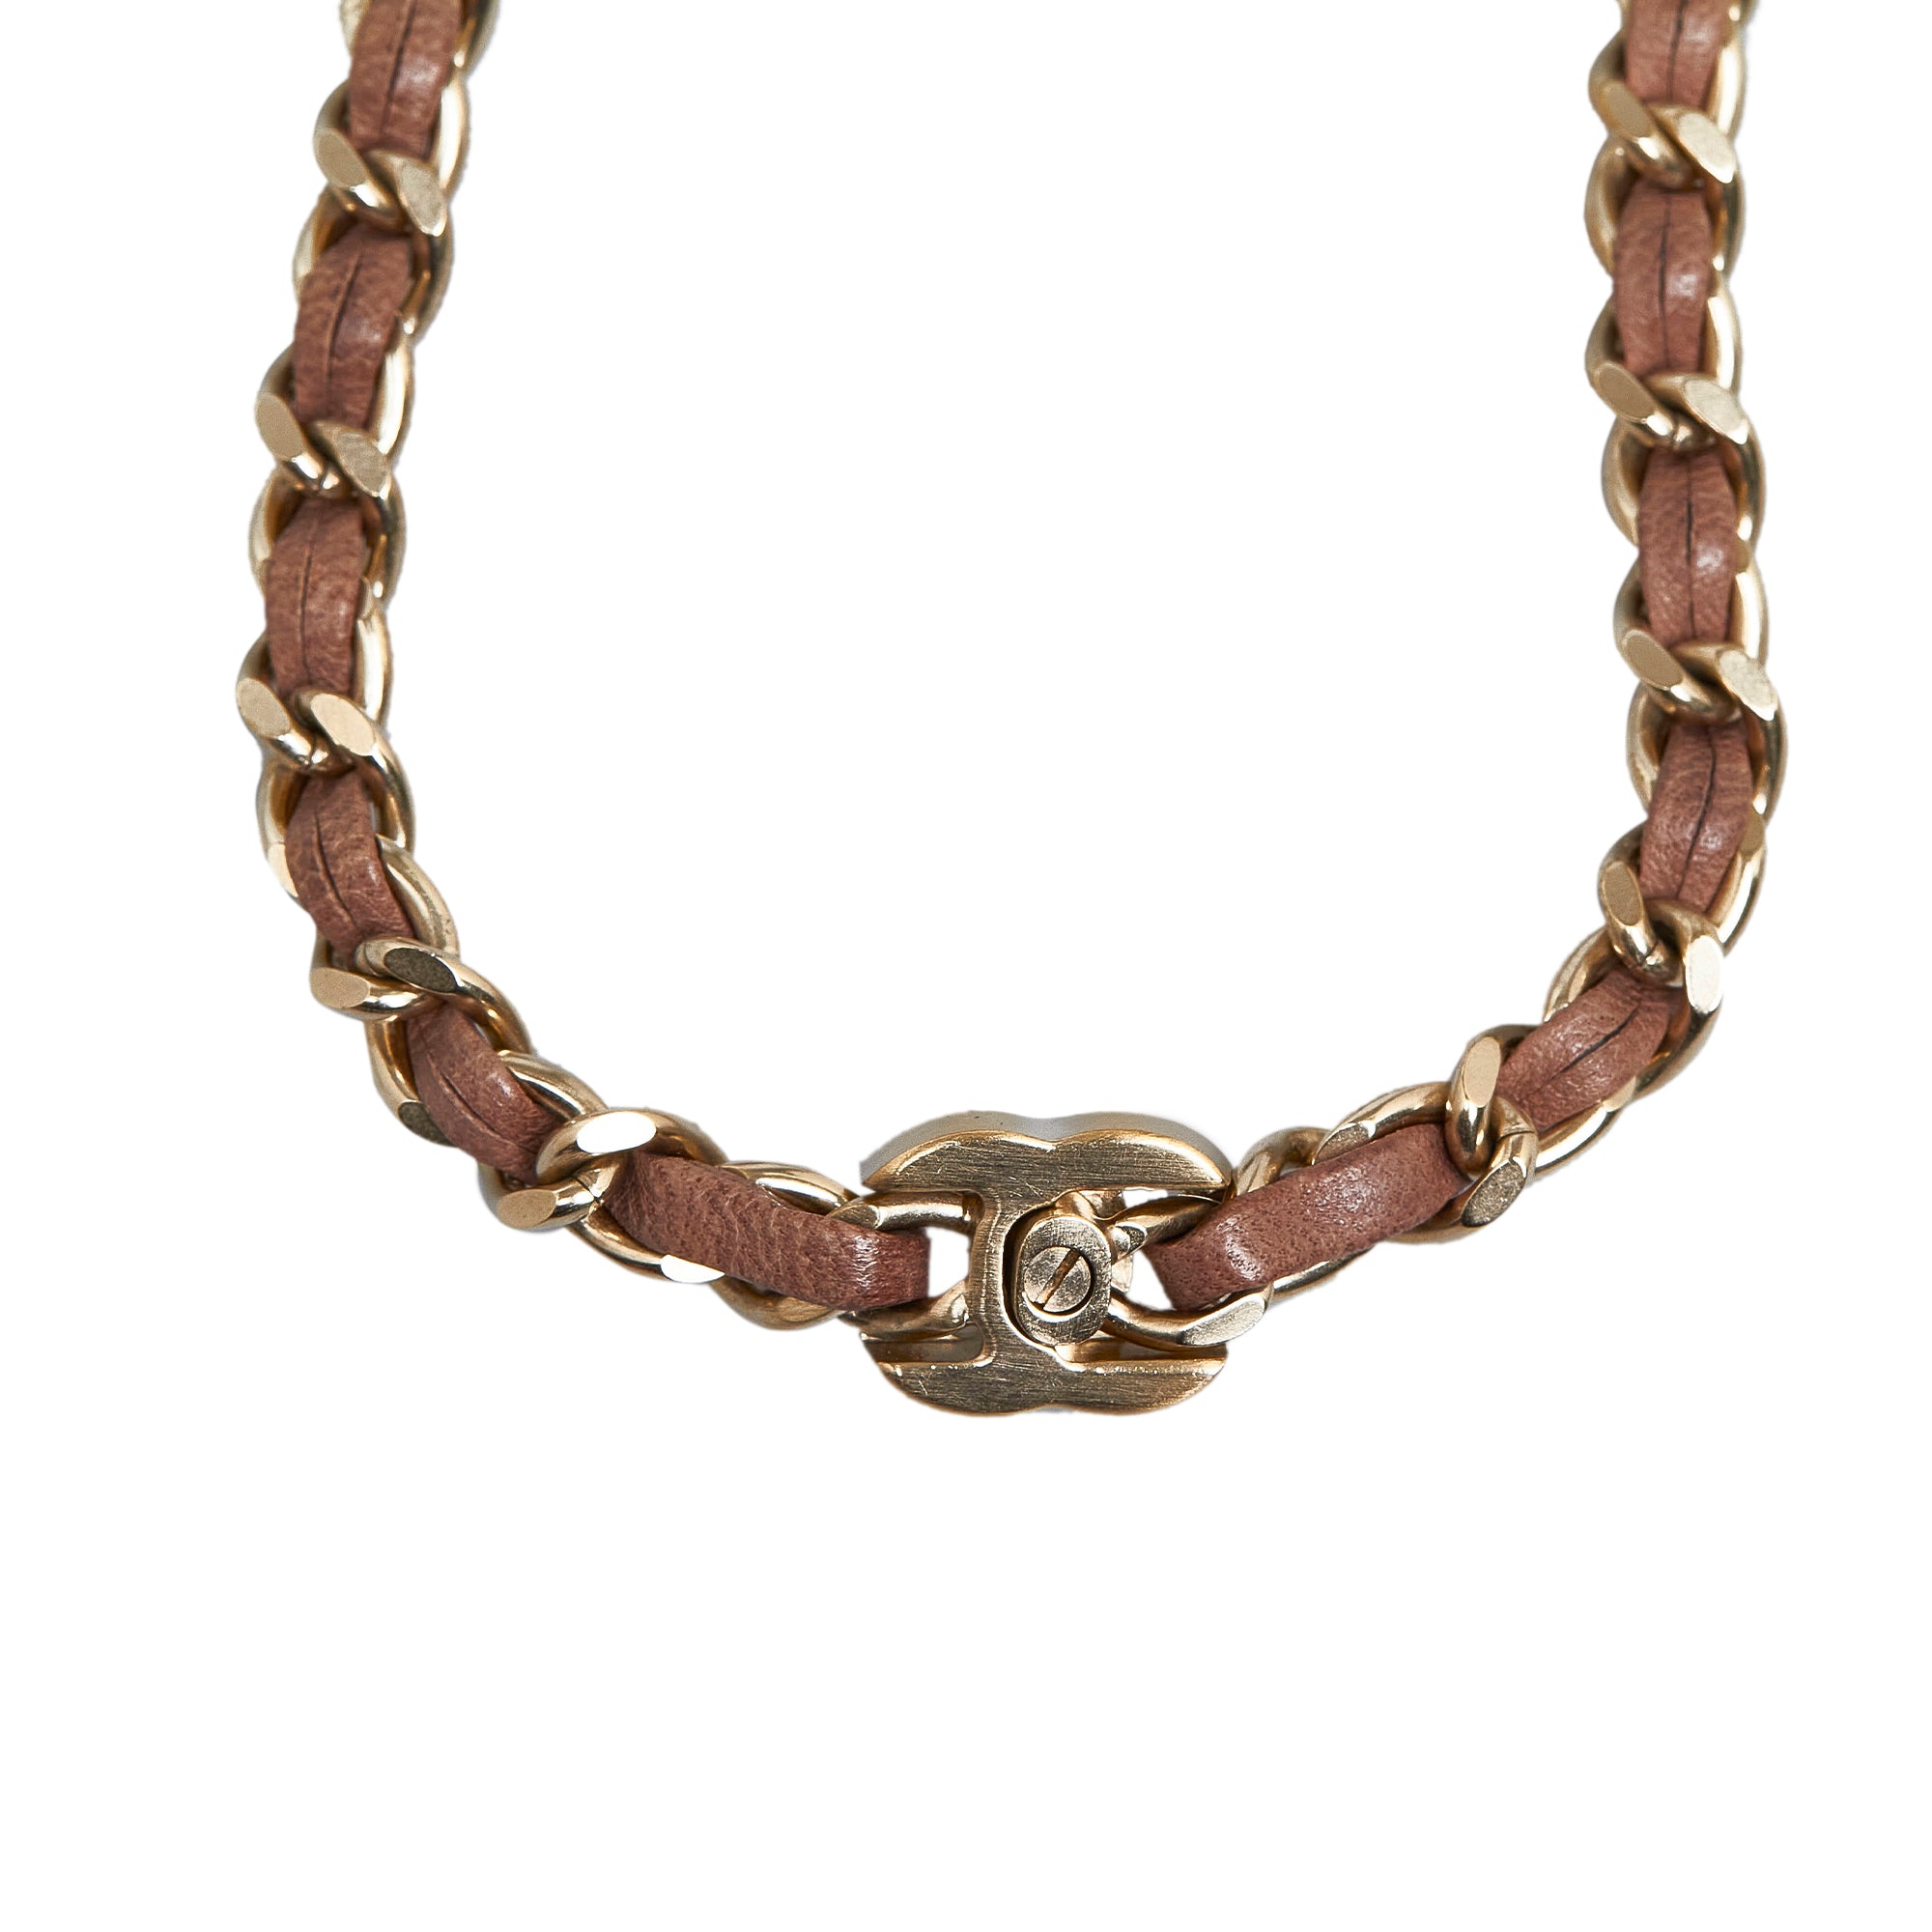 Chanel Rare Collectors Vintage '89 Gold & Leather Choker Necklace